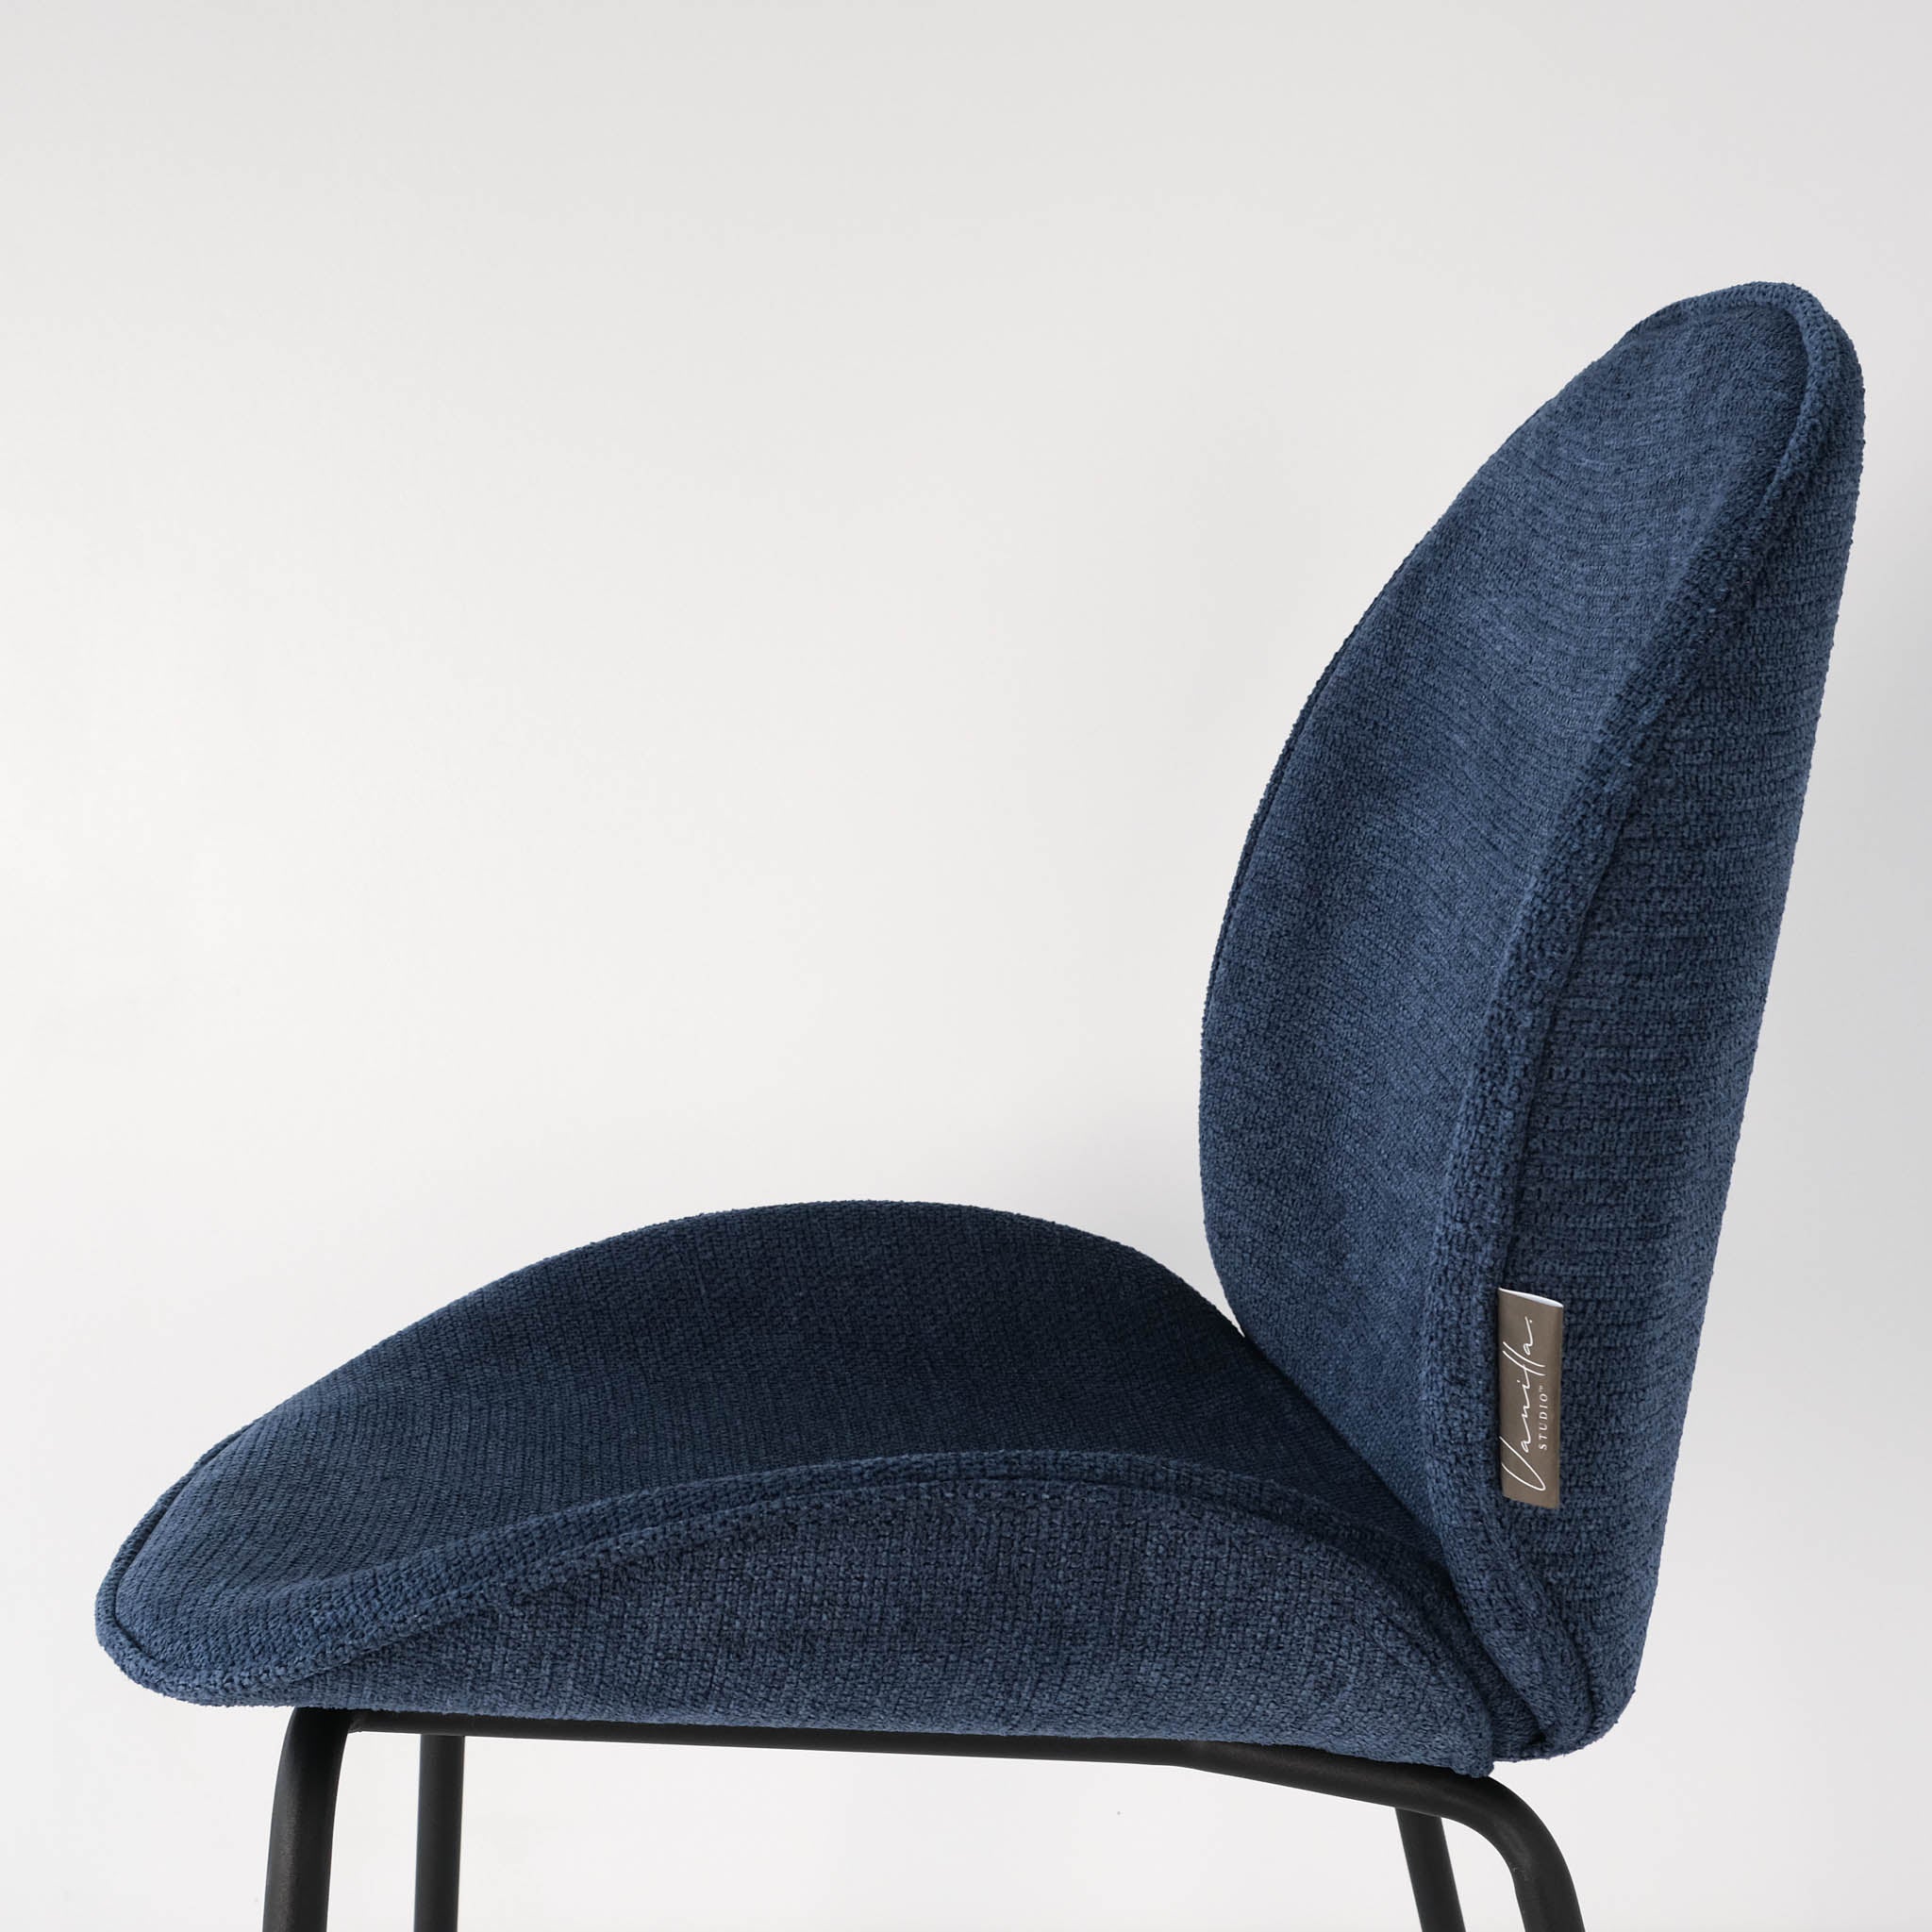 Seat view of a royal blue Beetle dining chair